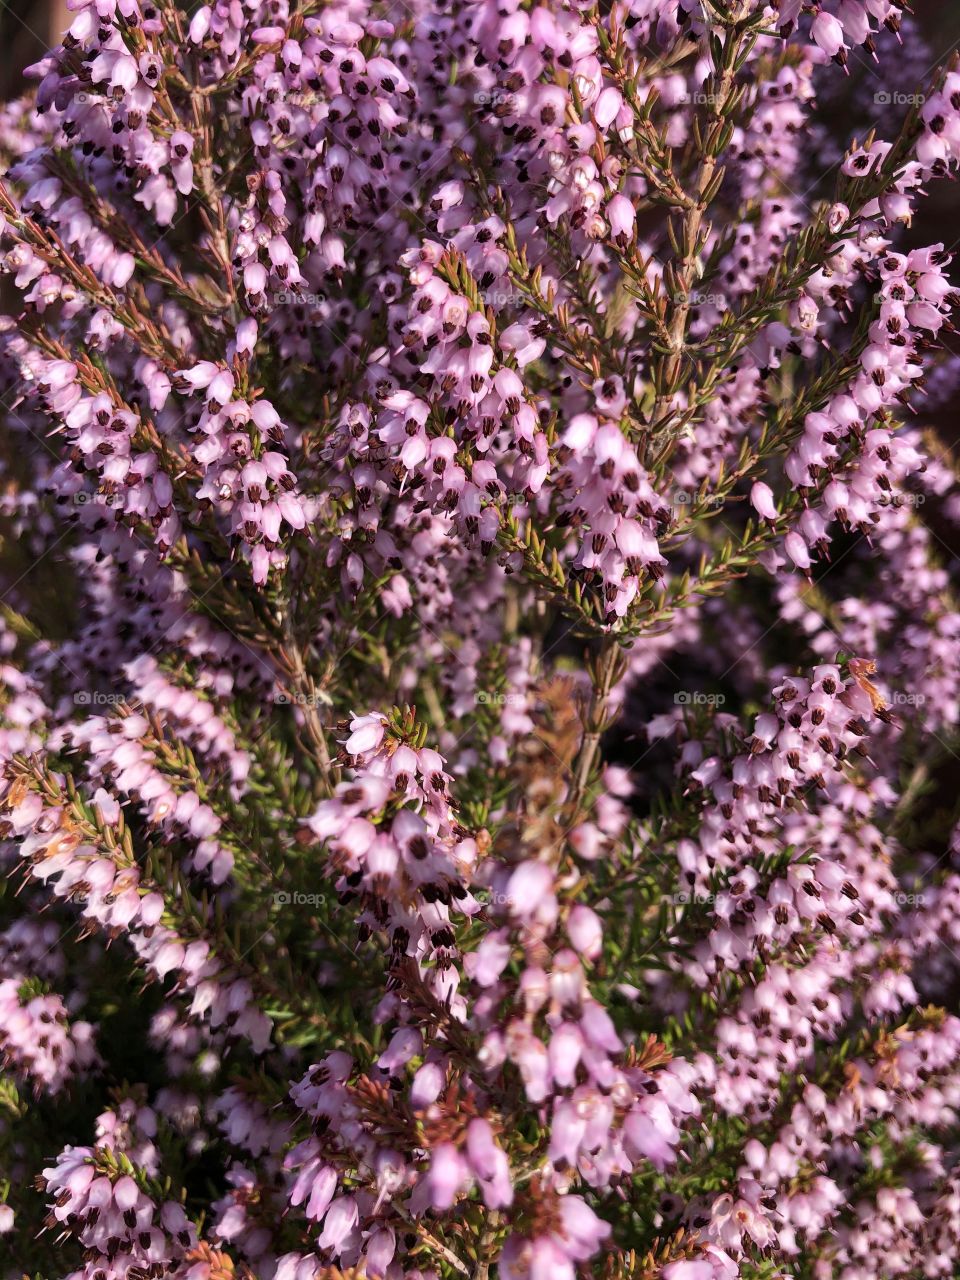 The first of two spring heathers from our garden, to lightened the mood that is the pandemic corona virus.